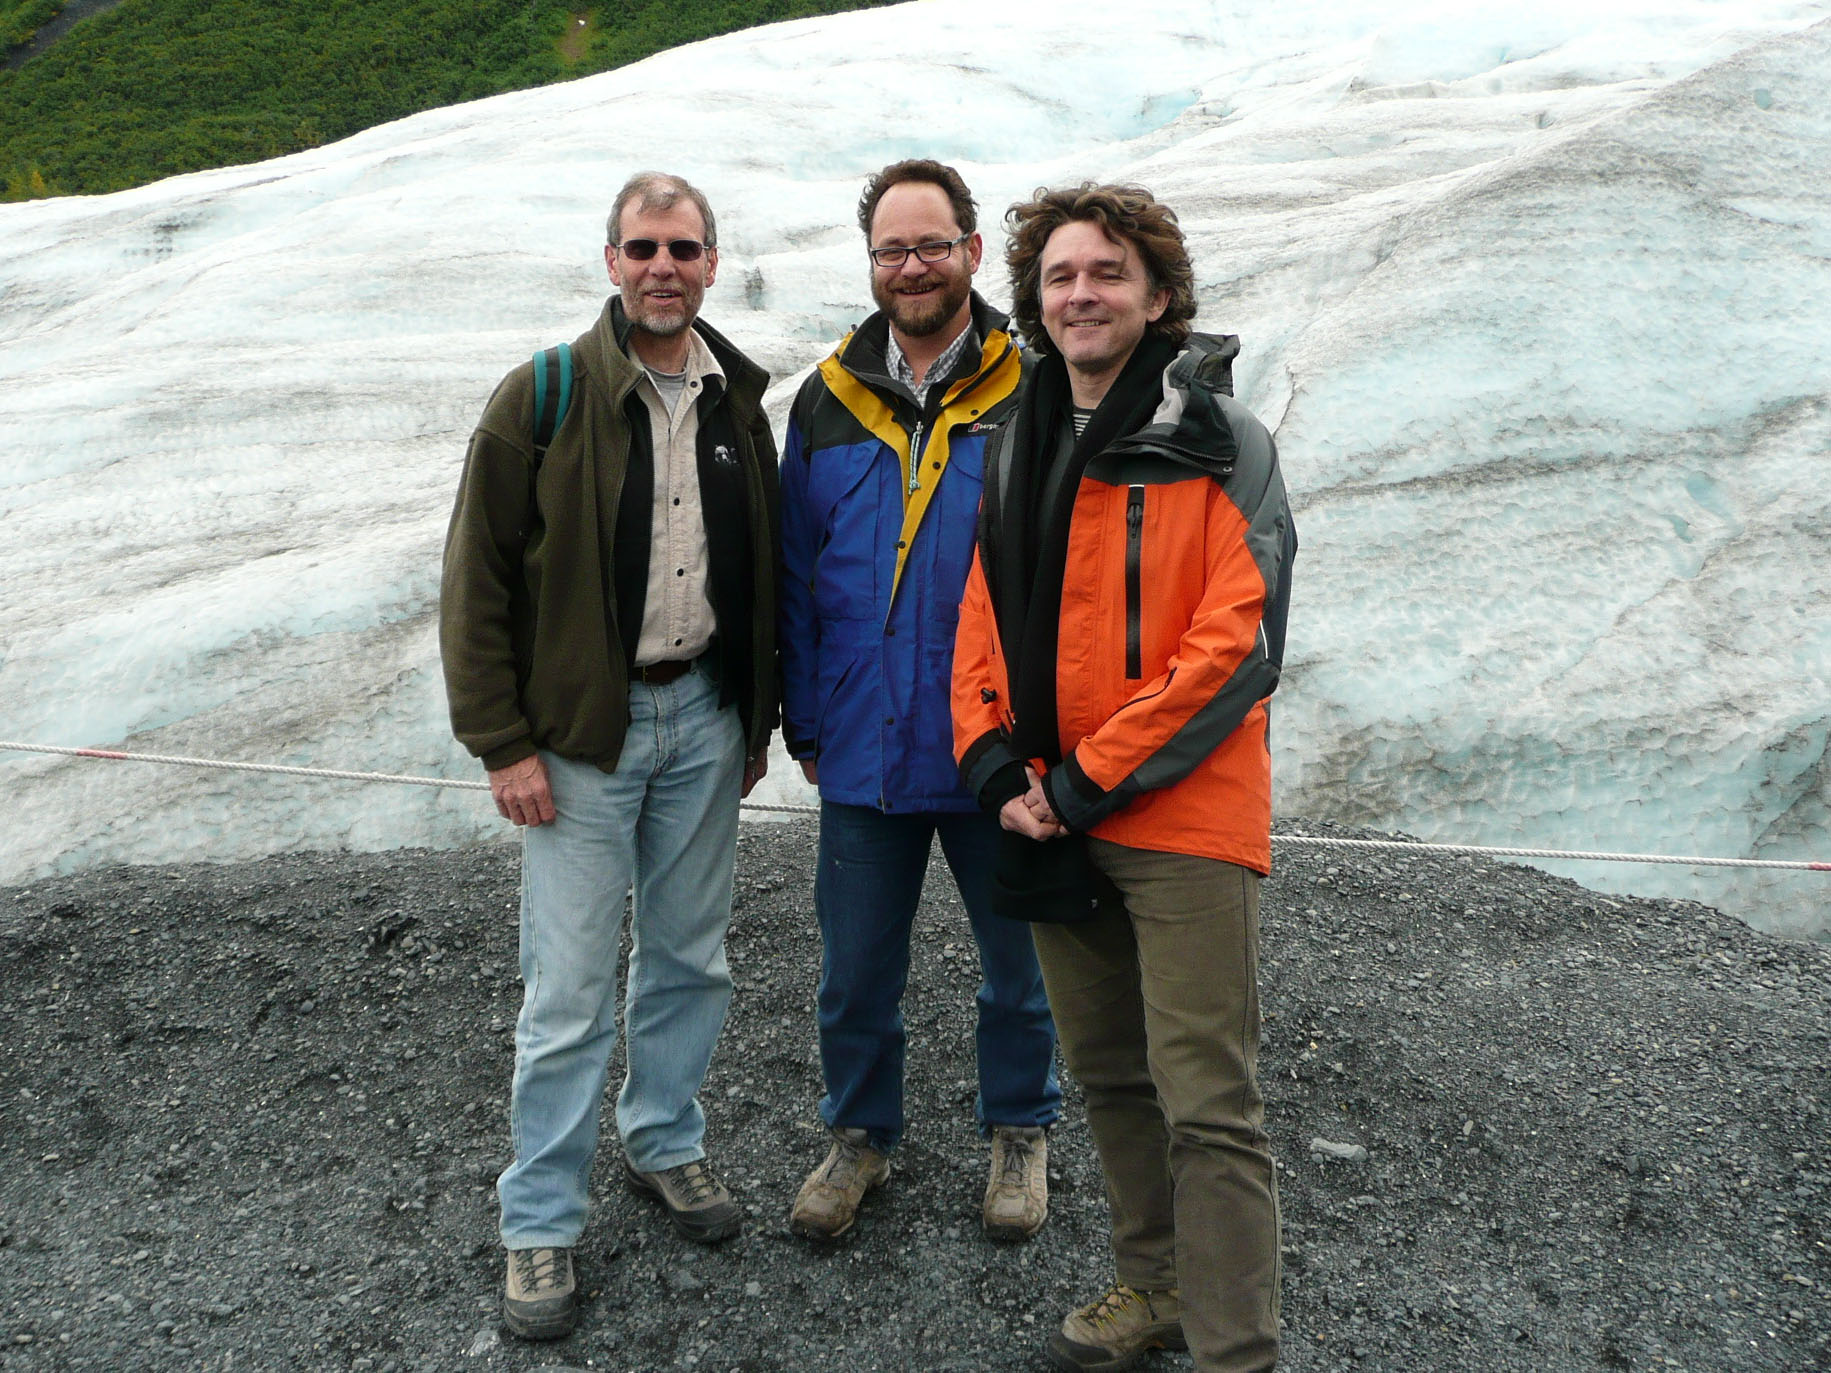 Andy Gleadow, Rod and Kerry Gallagher on a field trip during the 11th International Thermochronology Conference at Anchorage, Alaska in September 2008. Image: Andy Gleadow